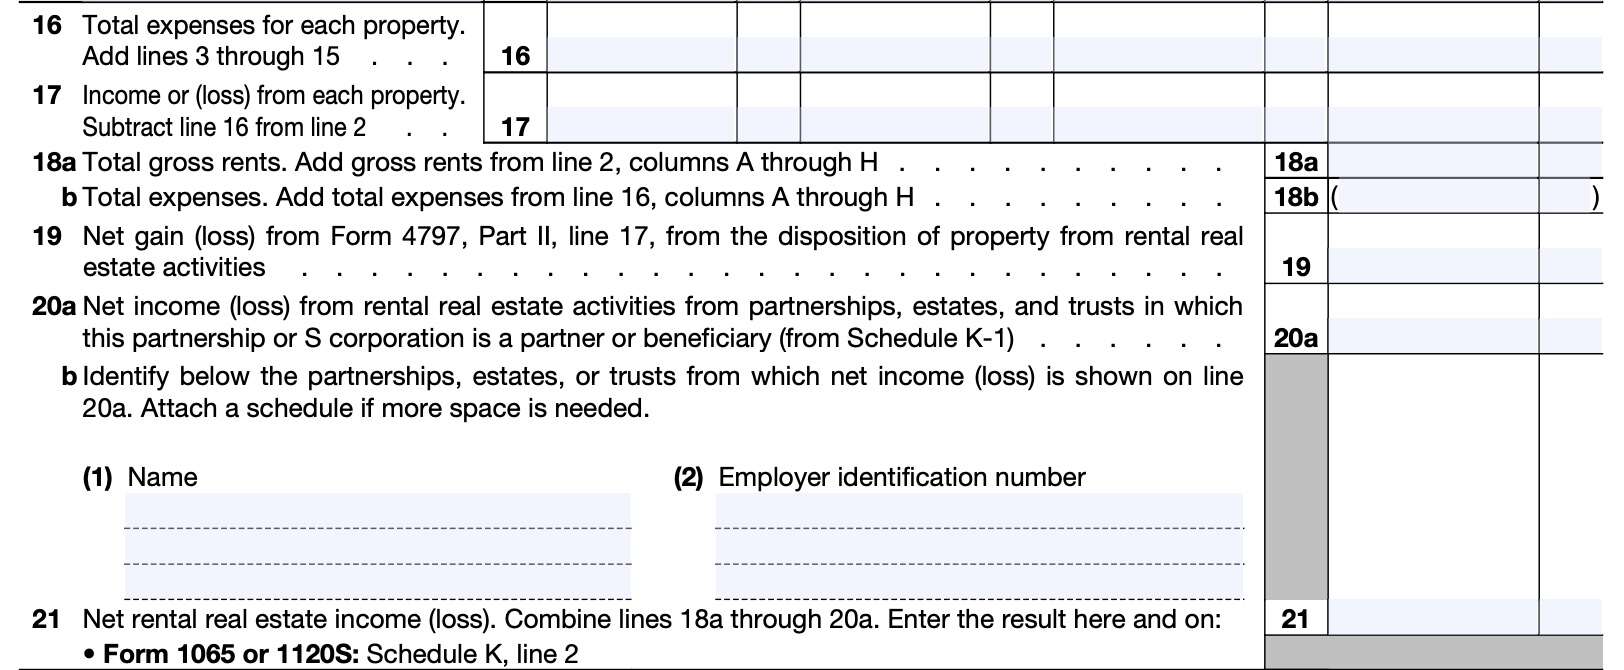 irs form 8825 total income and total expenses